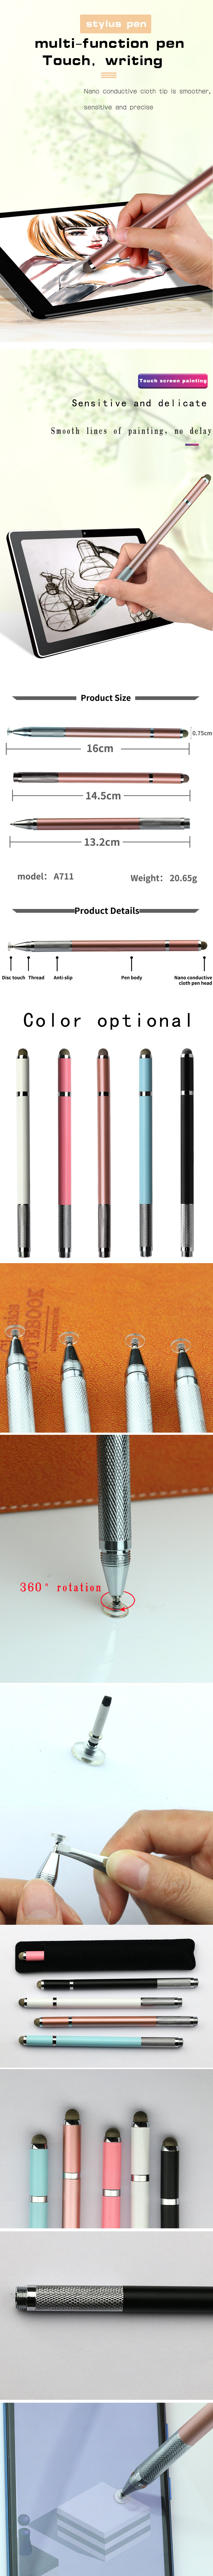 High promotion branded 2 in 1 active stylus touch metal pen tablet